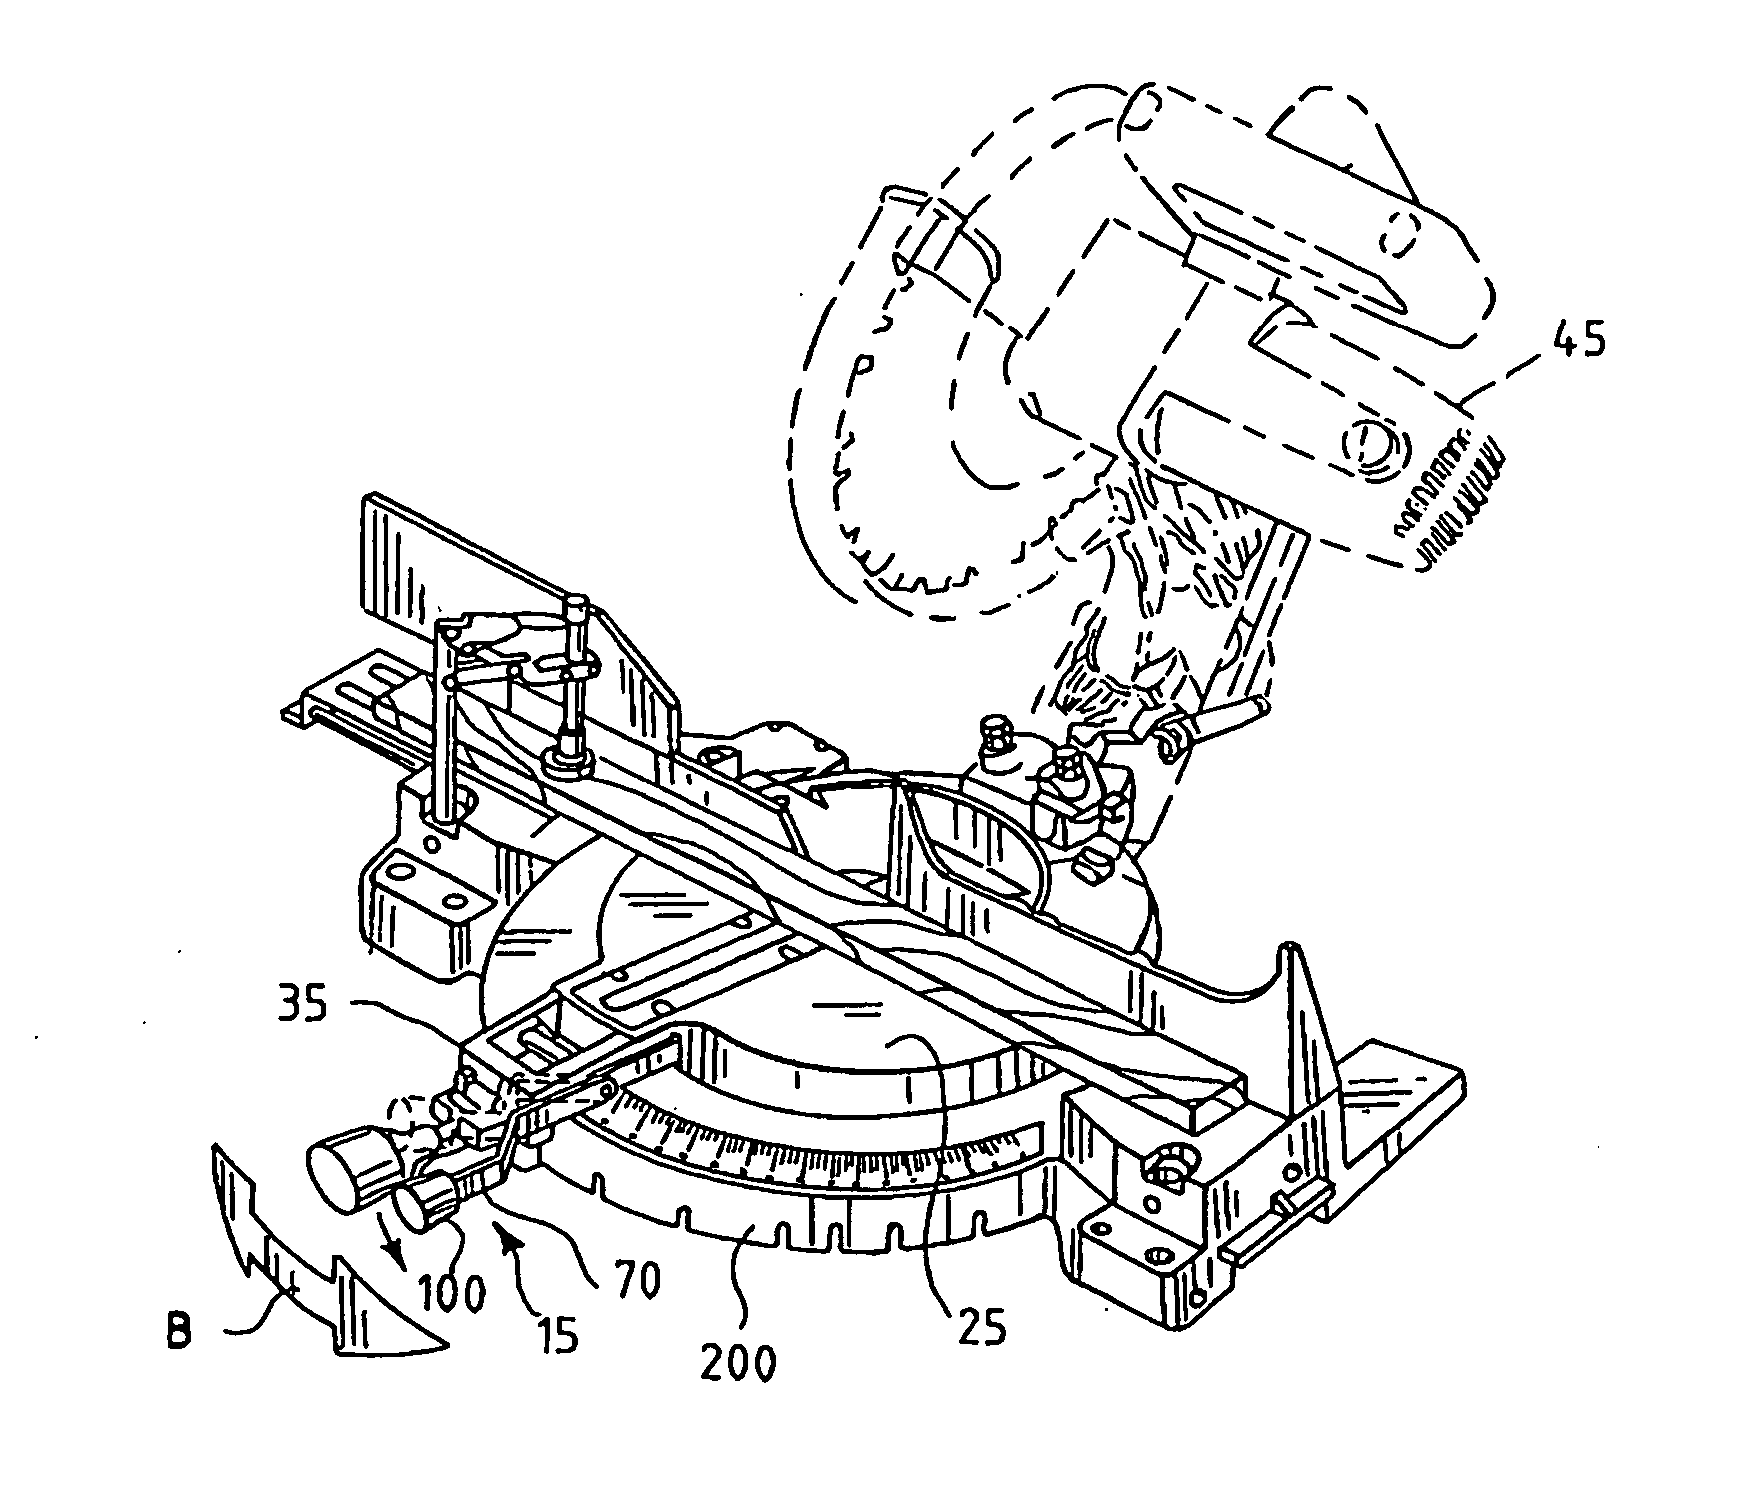 Front-accessible bevel locking system